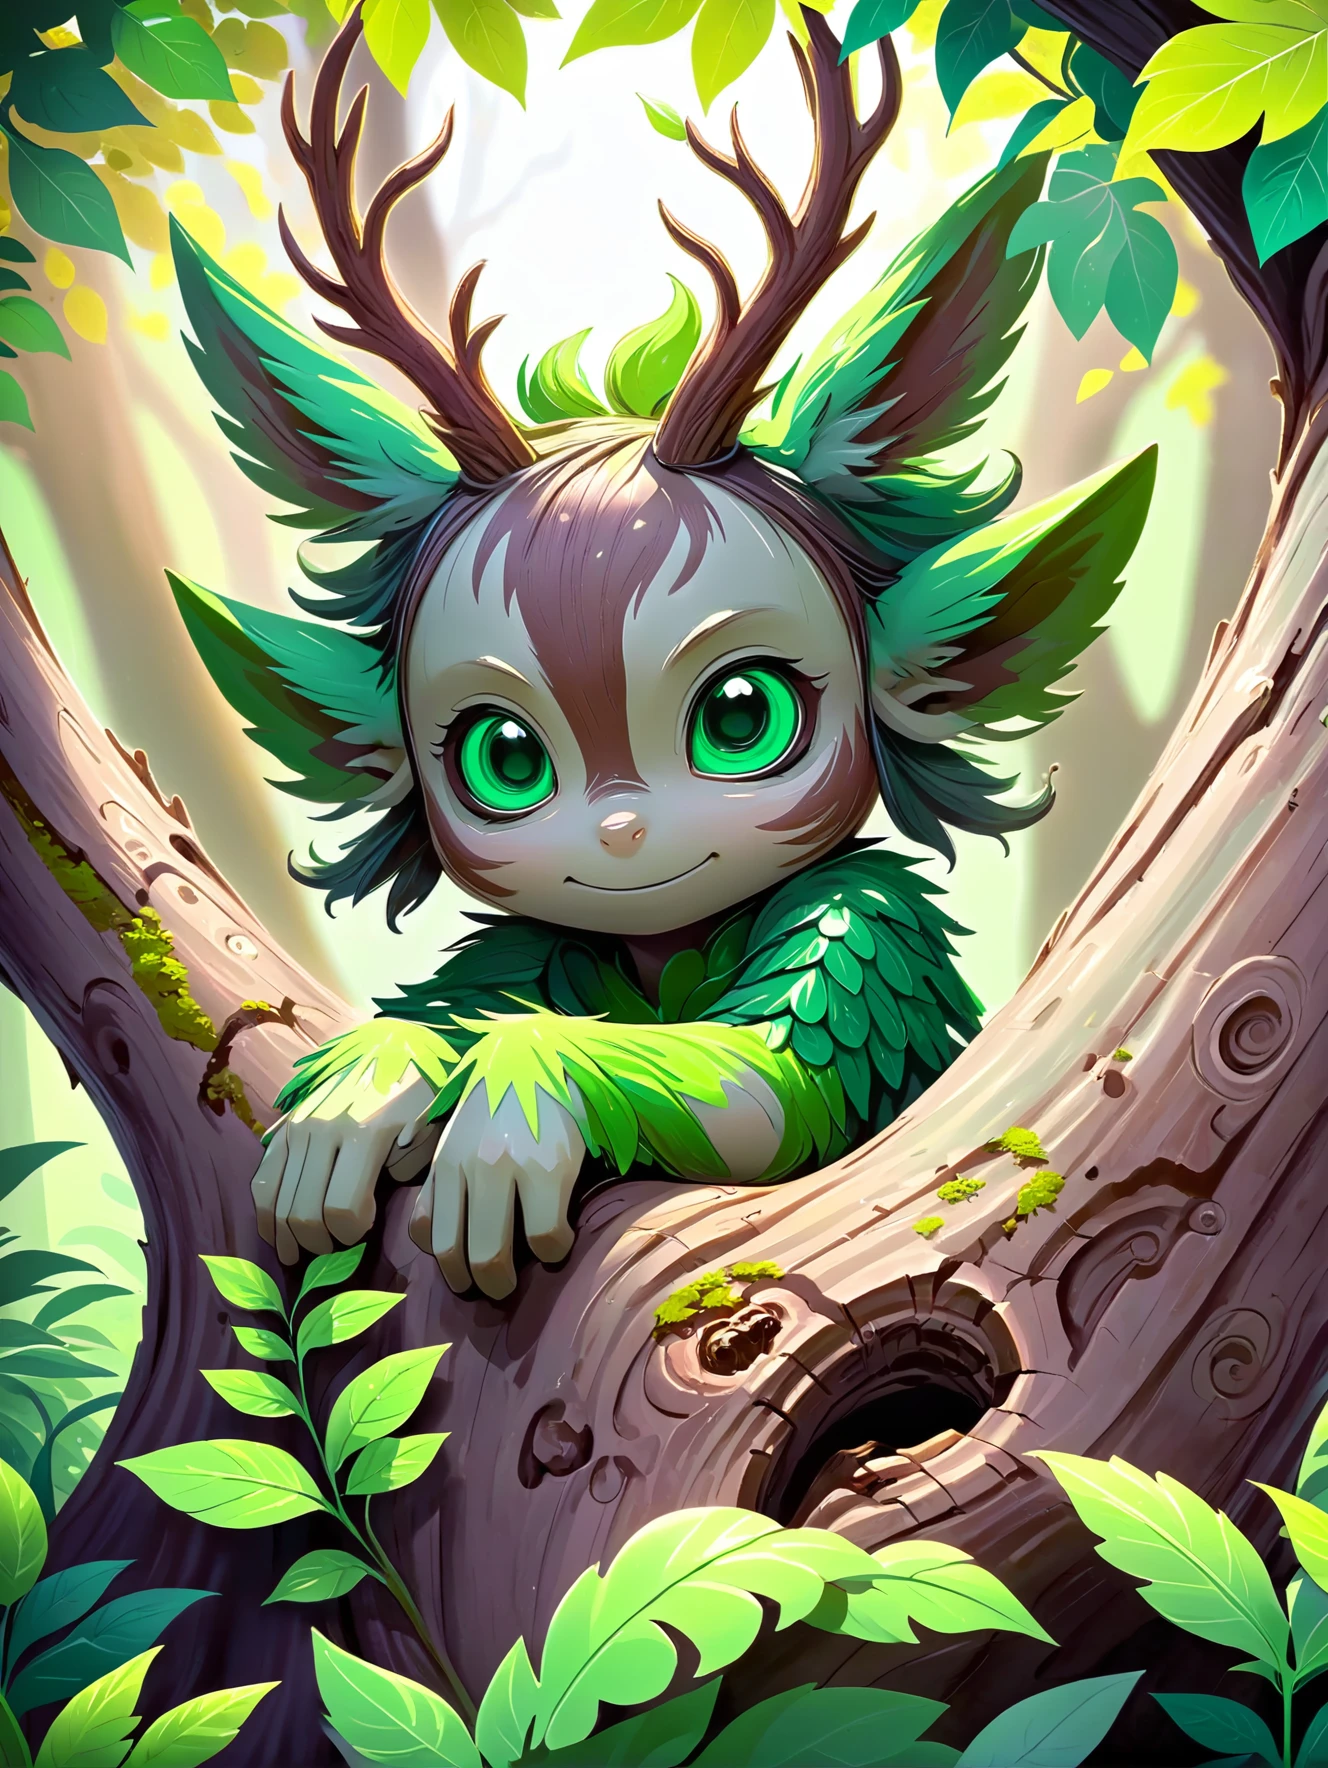 A mischievous forest spirit, camouflaged among the vibrant green leaves, peeking out from behind a tree trunk.